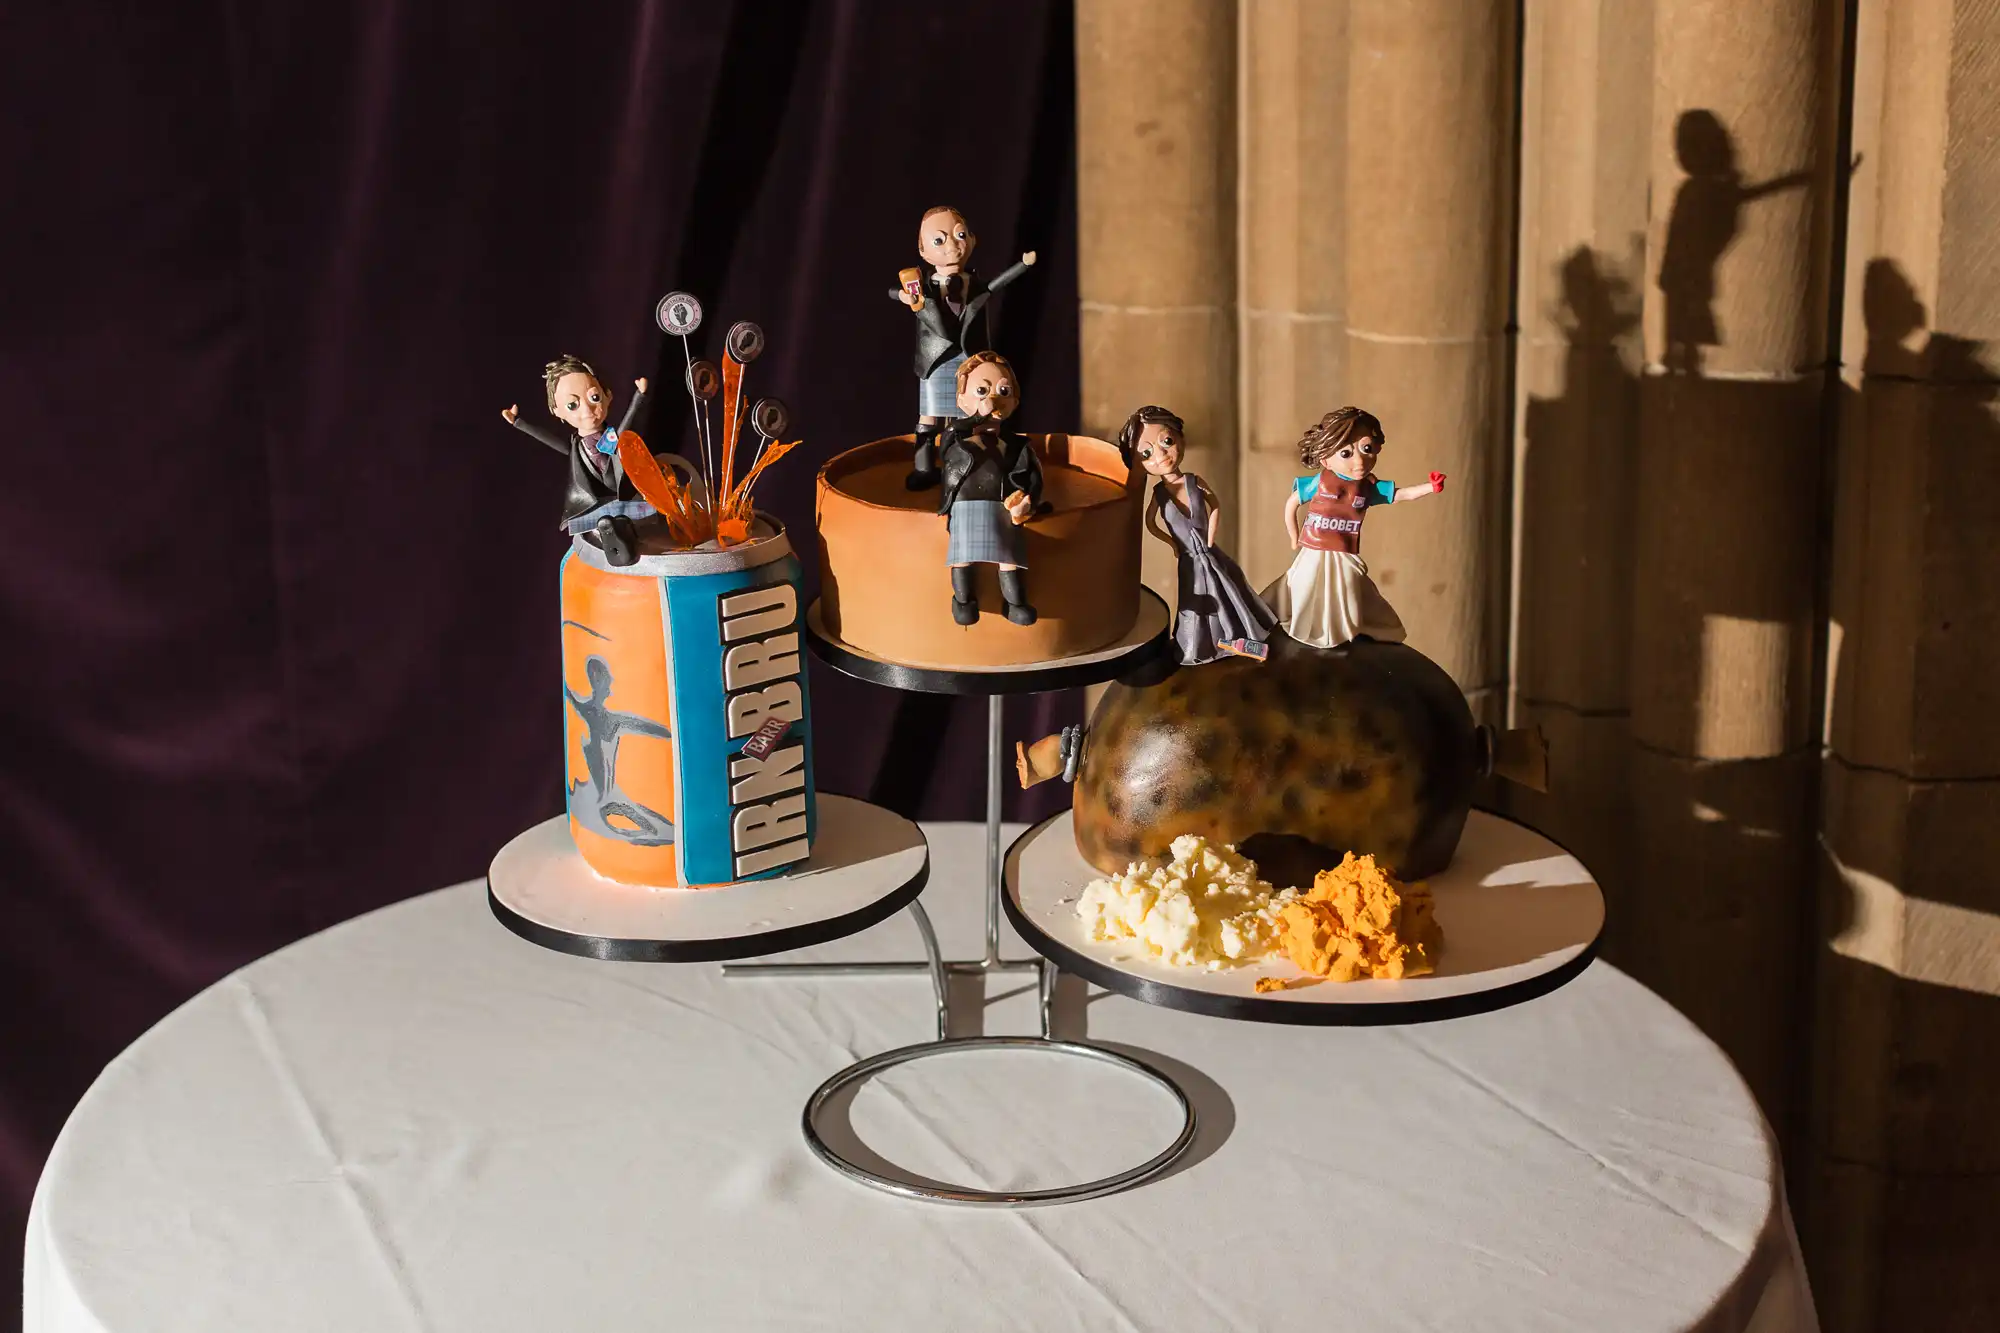 A whimsical wedding cake decorated with cake toppers representing the bride and groom as characters from "doctor who," displayed alongside a traditional guacamole-covered roasted turkey.